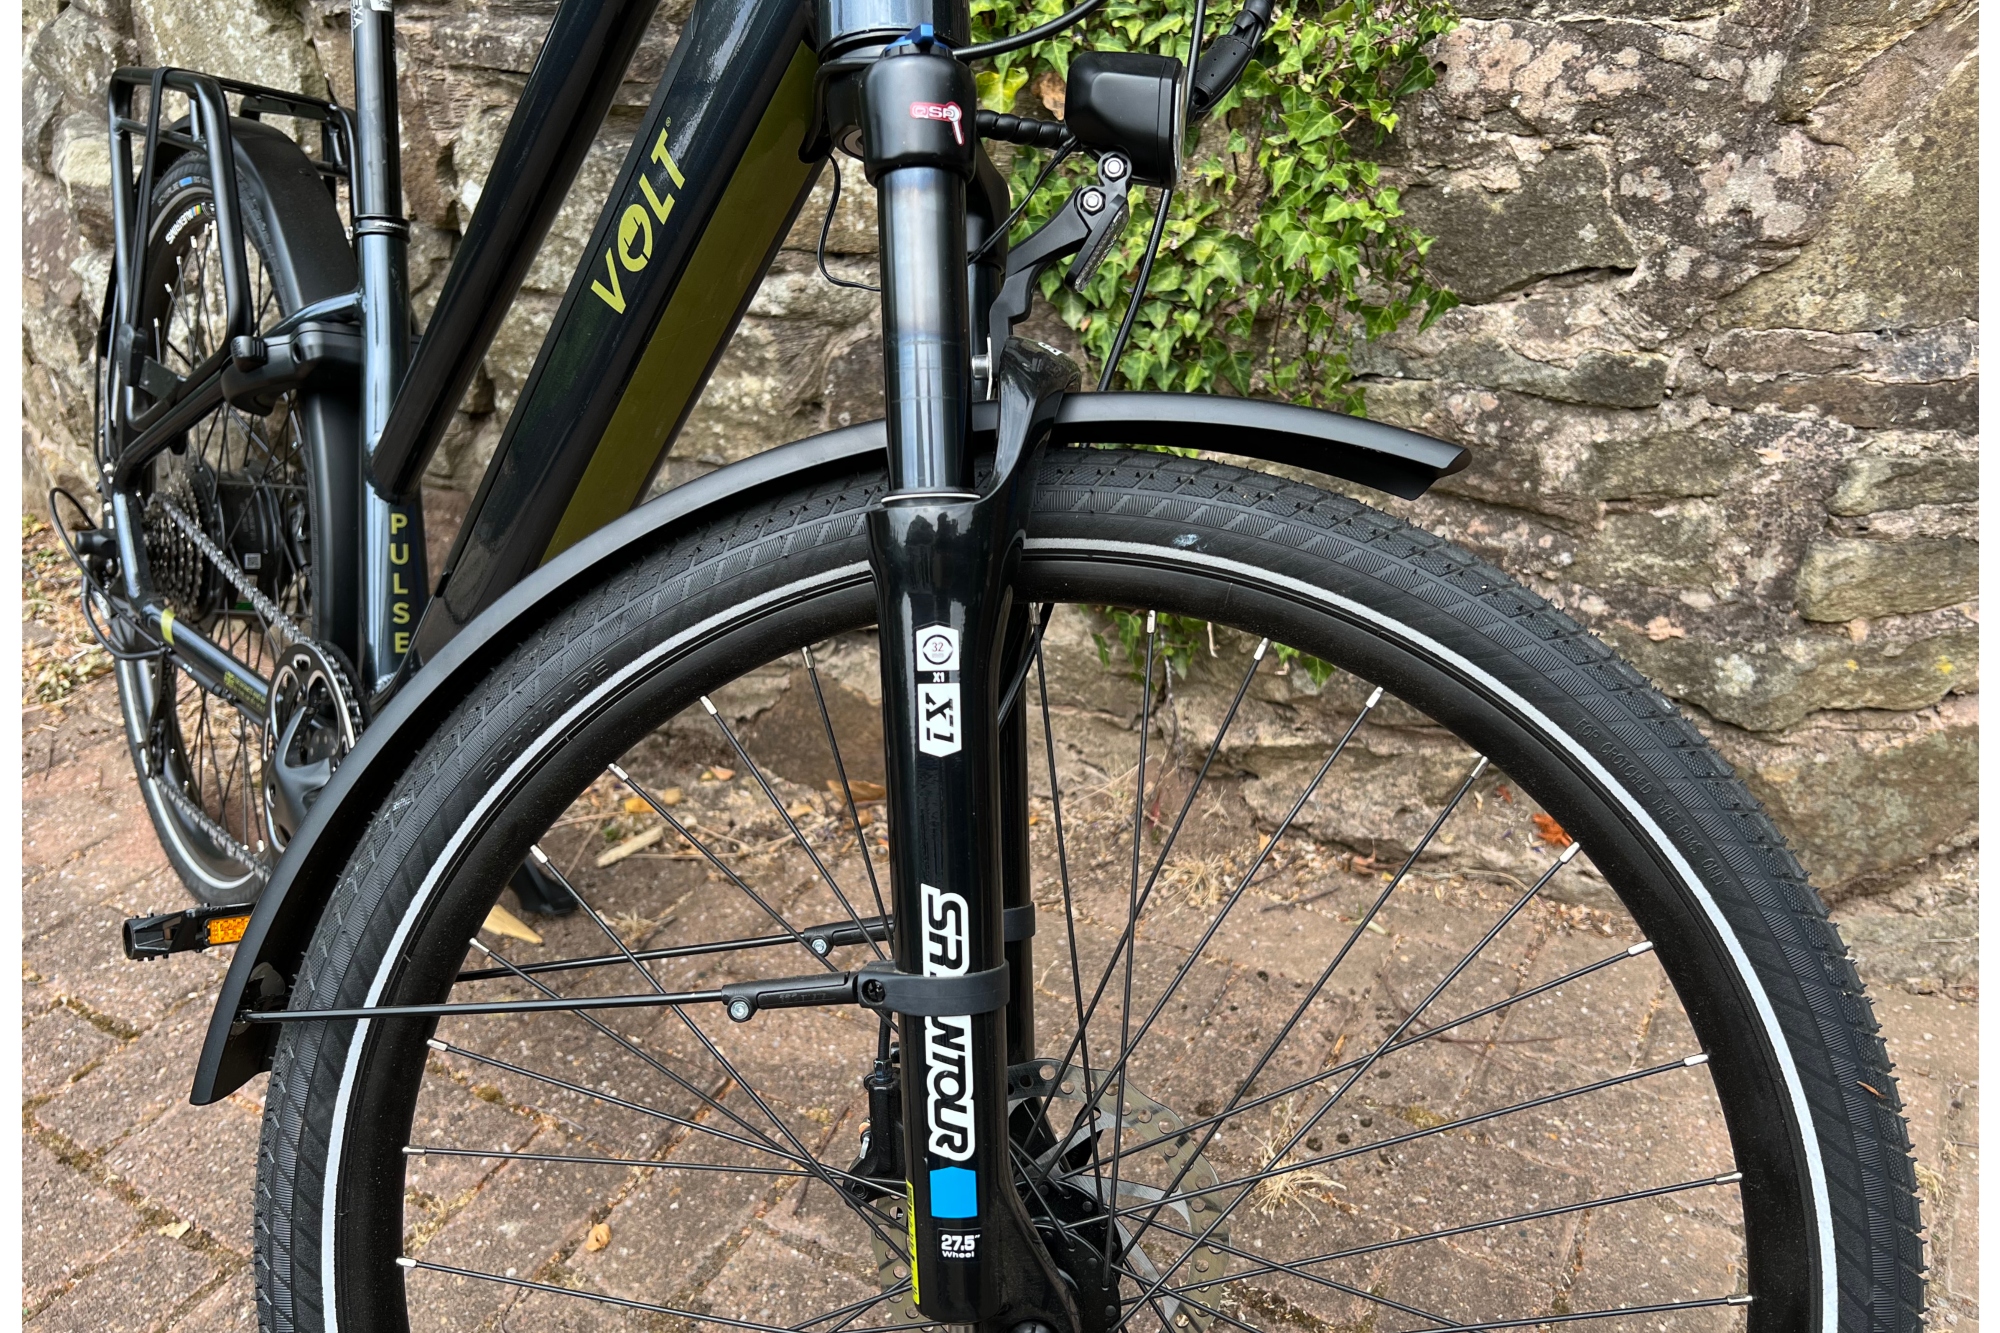 This is an image of the Suntour forks on the Volt Pulse LS e-bike